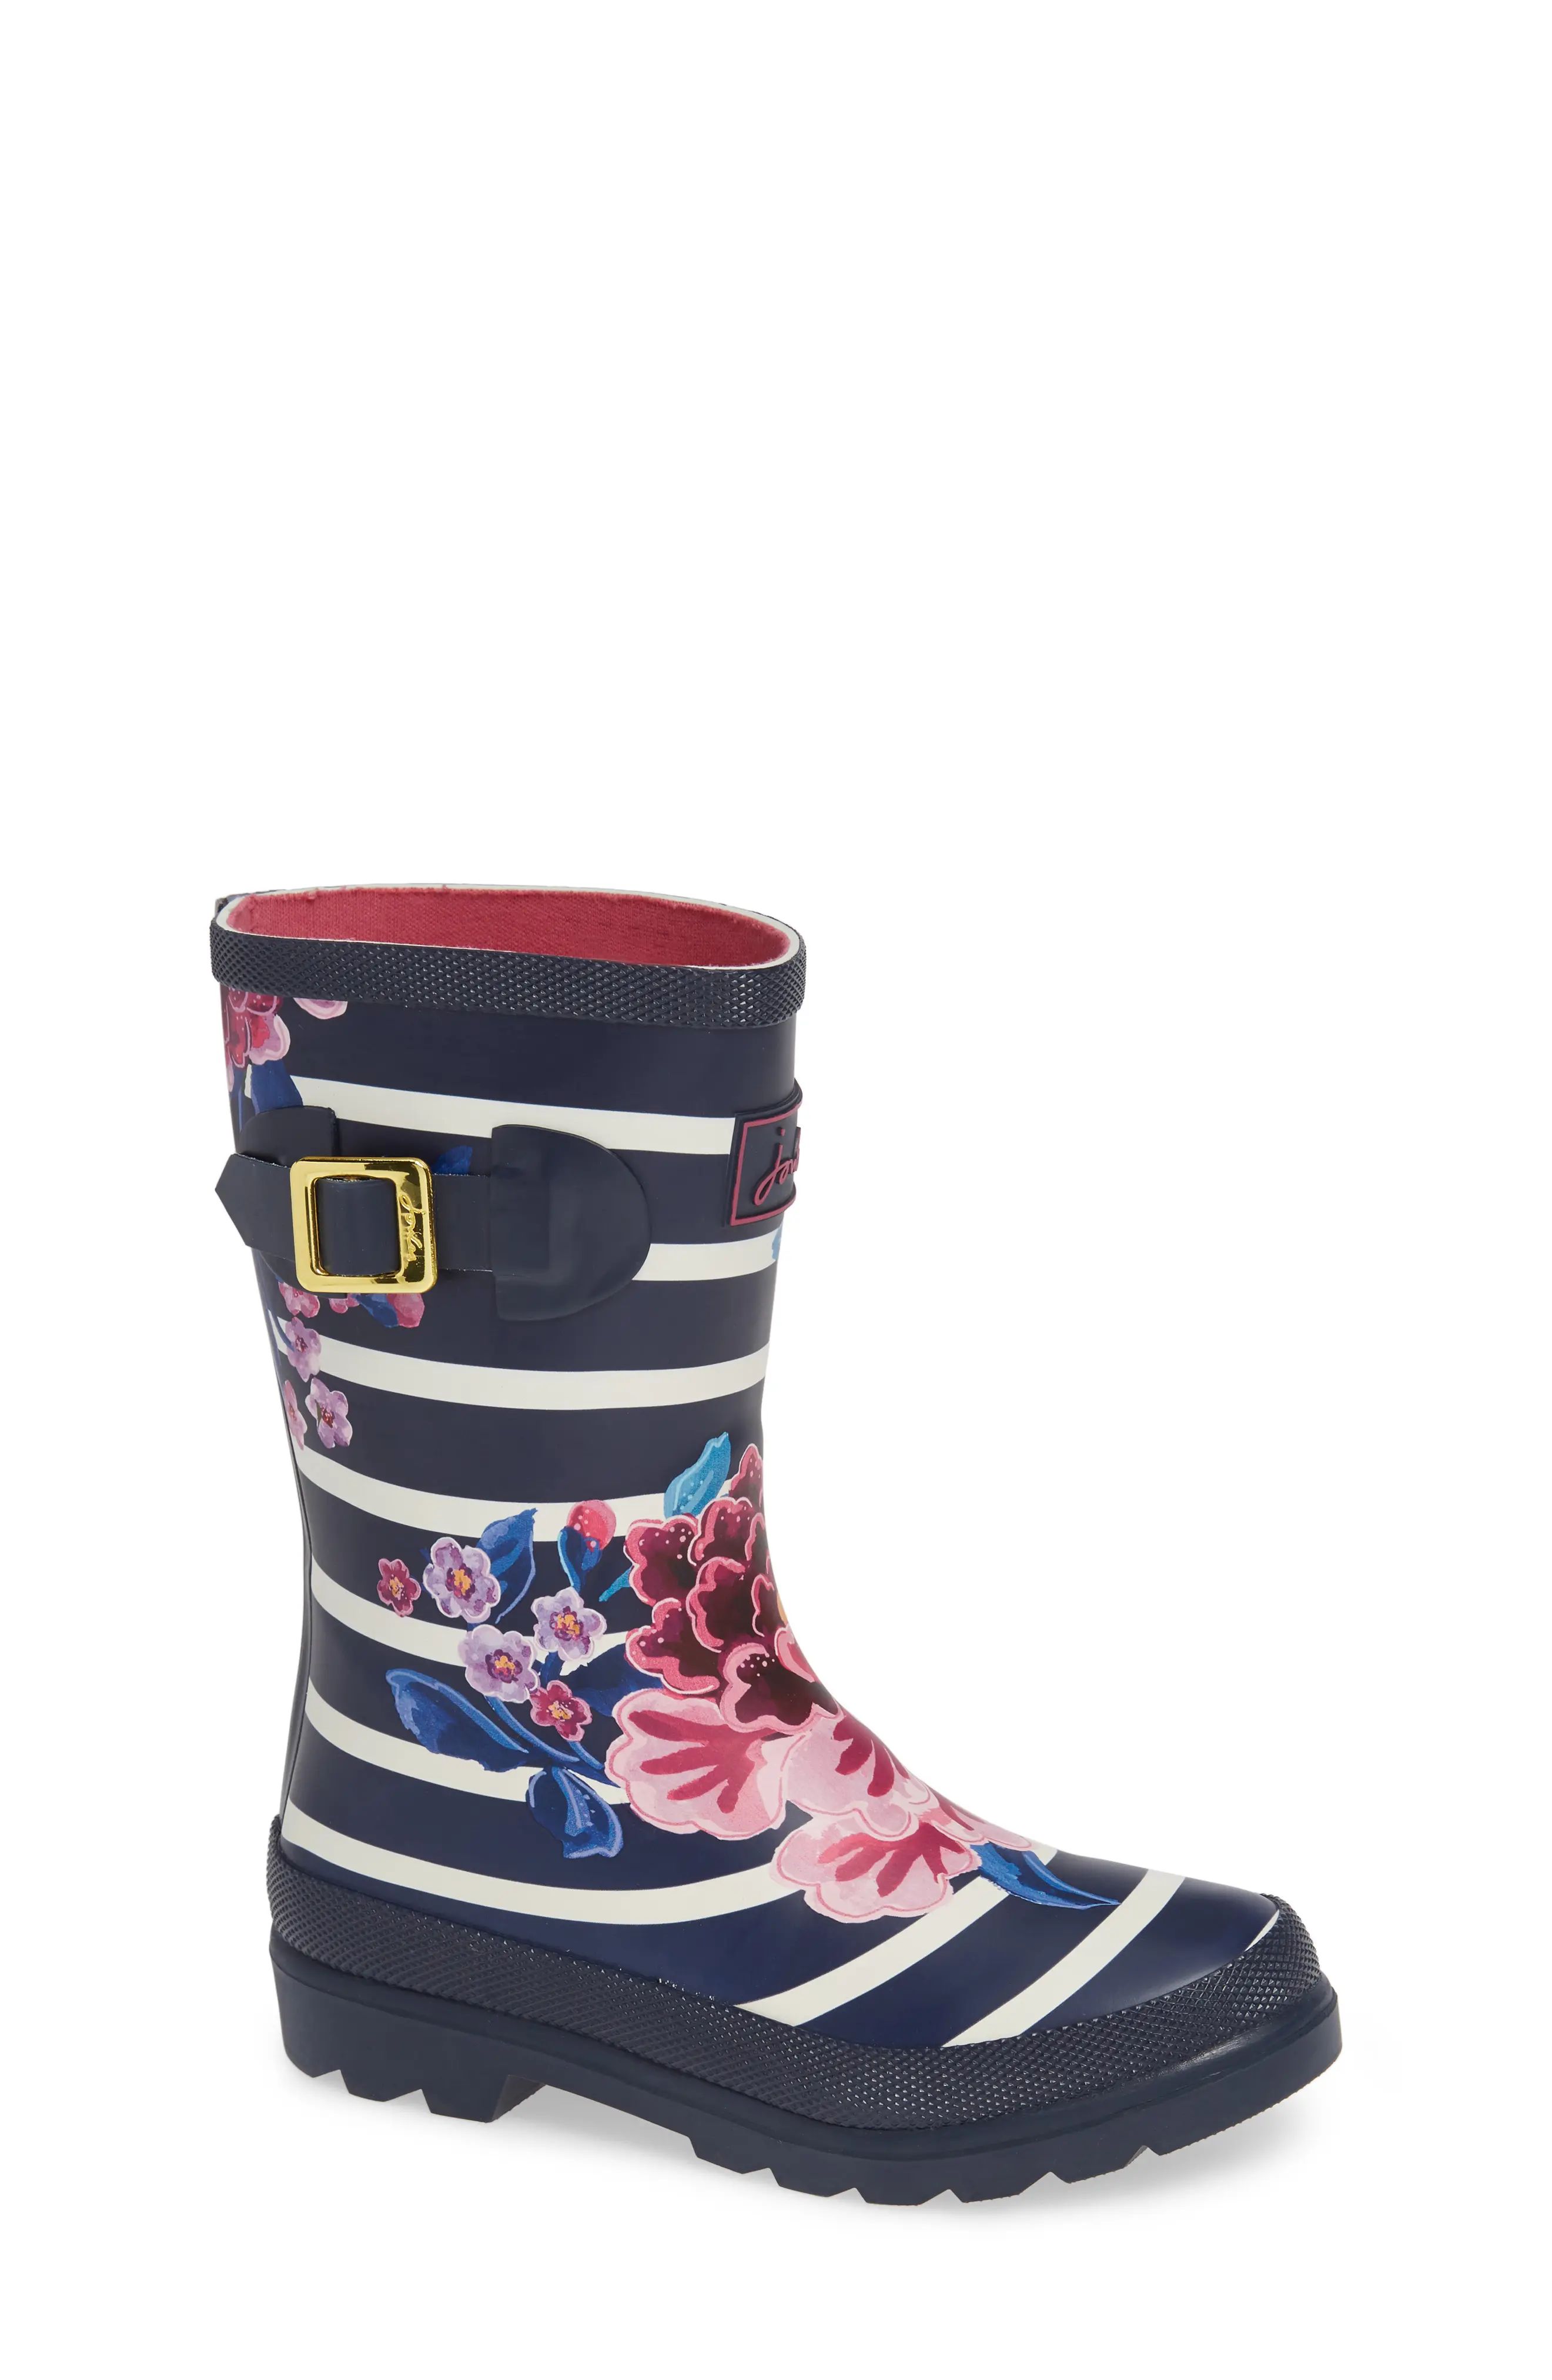 Girl's Joules Mid Height Print Welly Waterproof Rain Boot, Size 4 M - Blue | Nordstrom